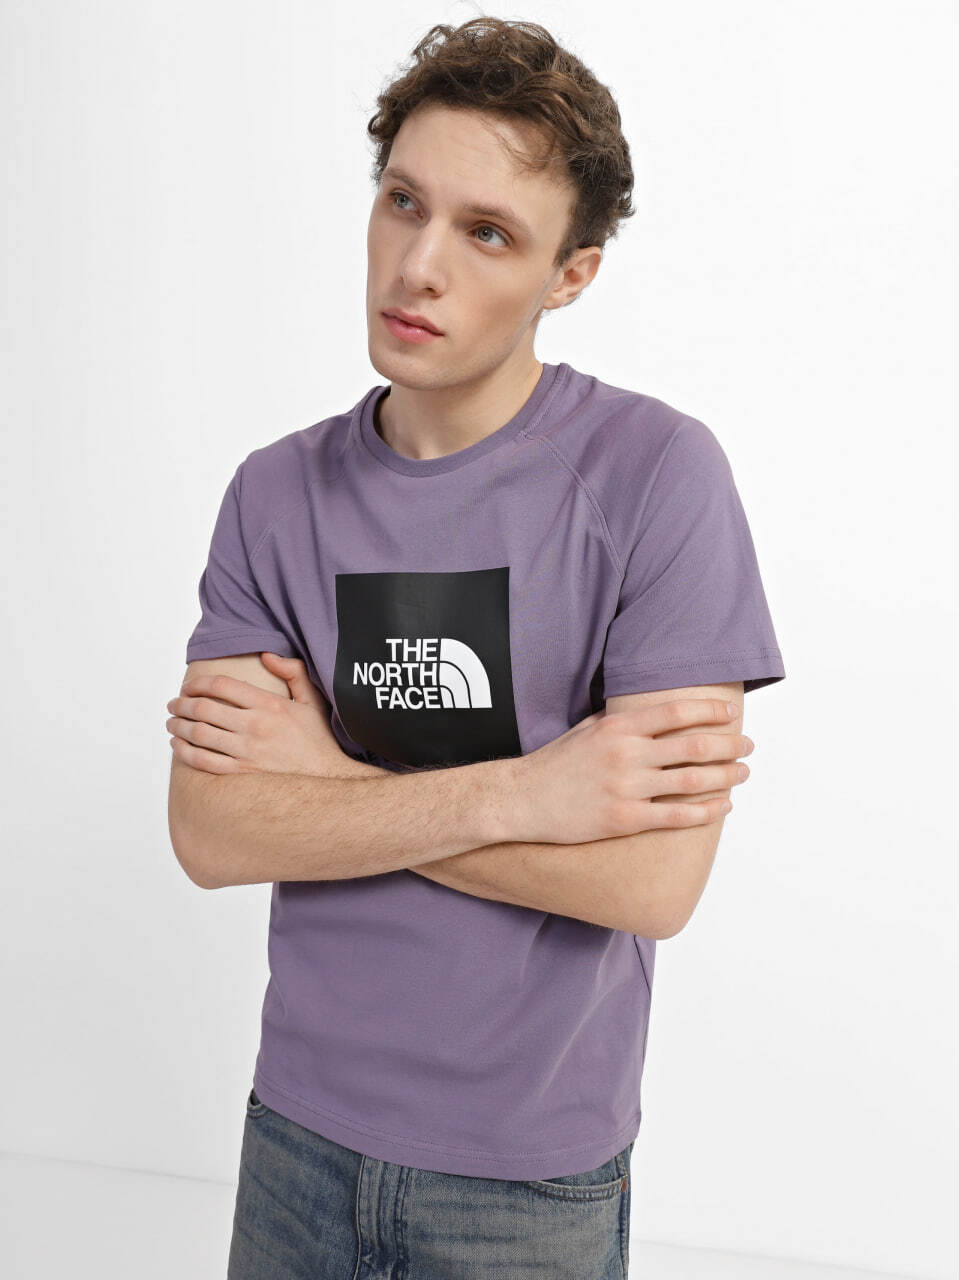 The North Face Red Box T-Shirt Purple